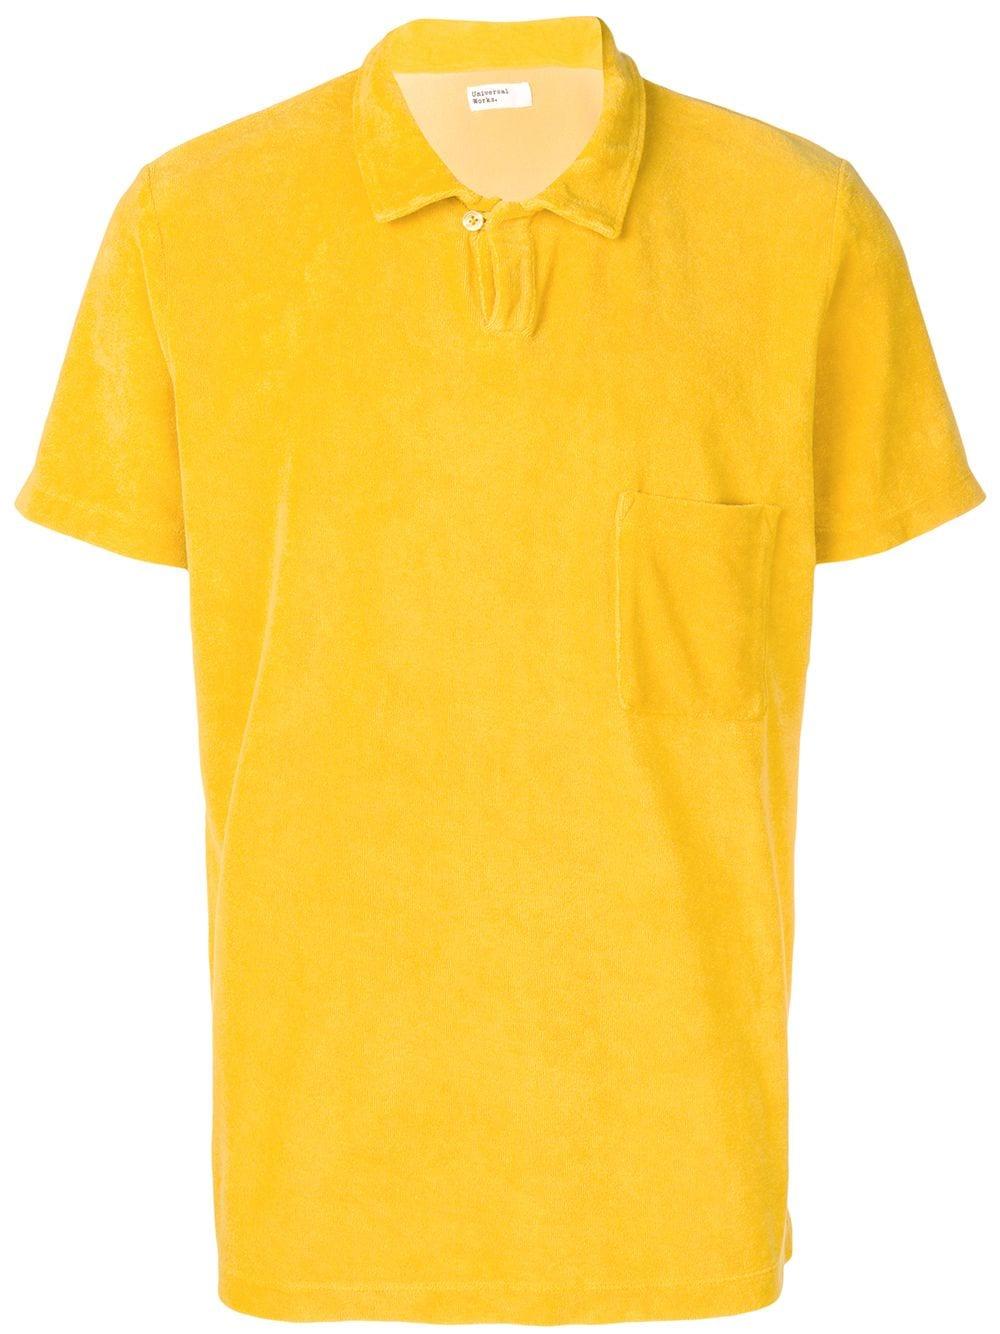 Universal Works Vacation Fleece Polo Shirt in Yellow for Men - Lyst